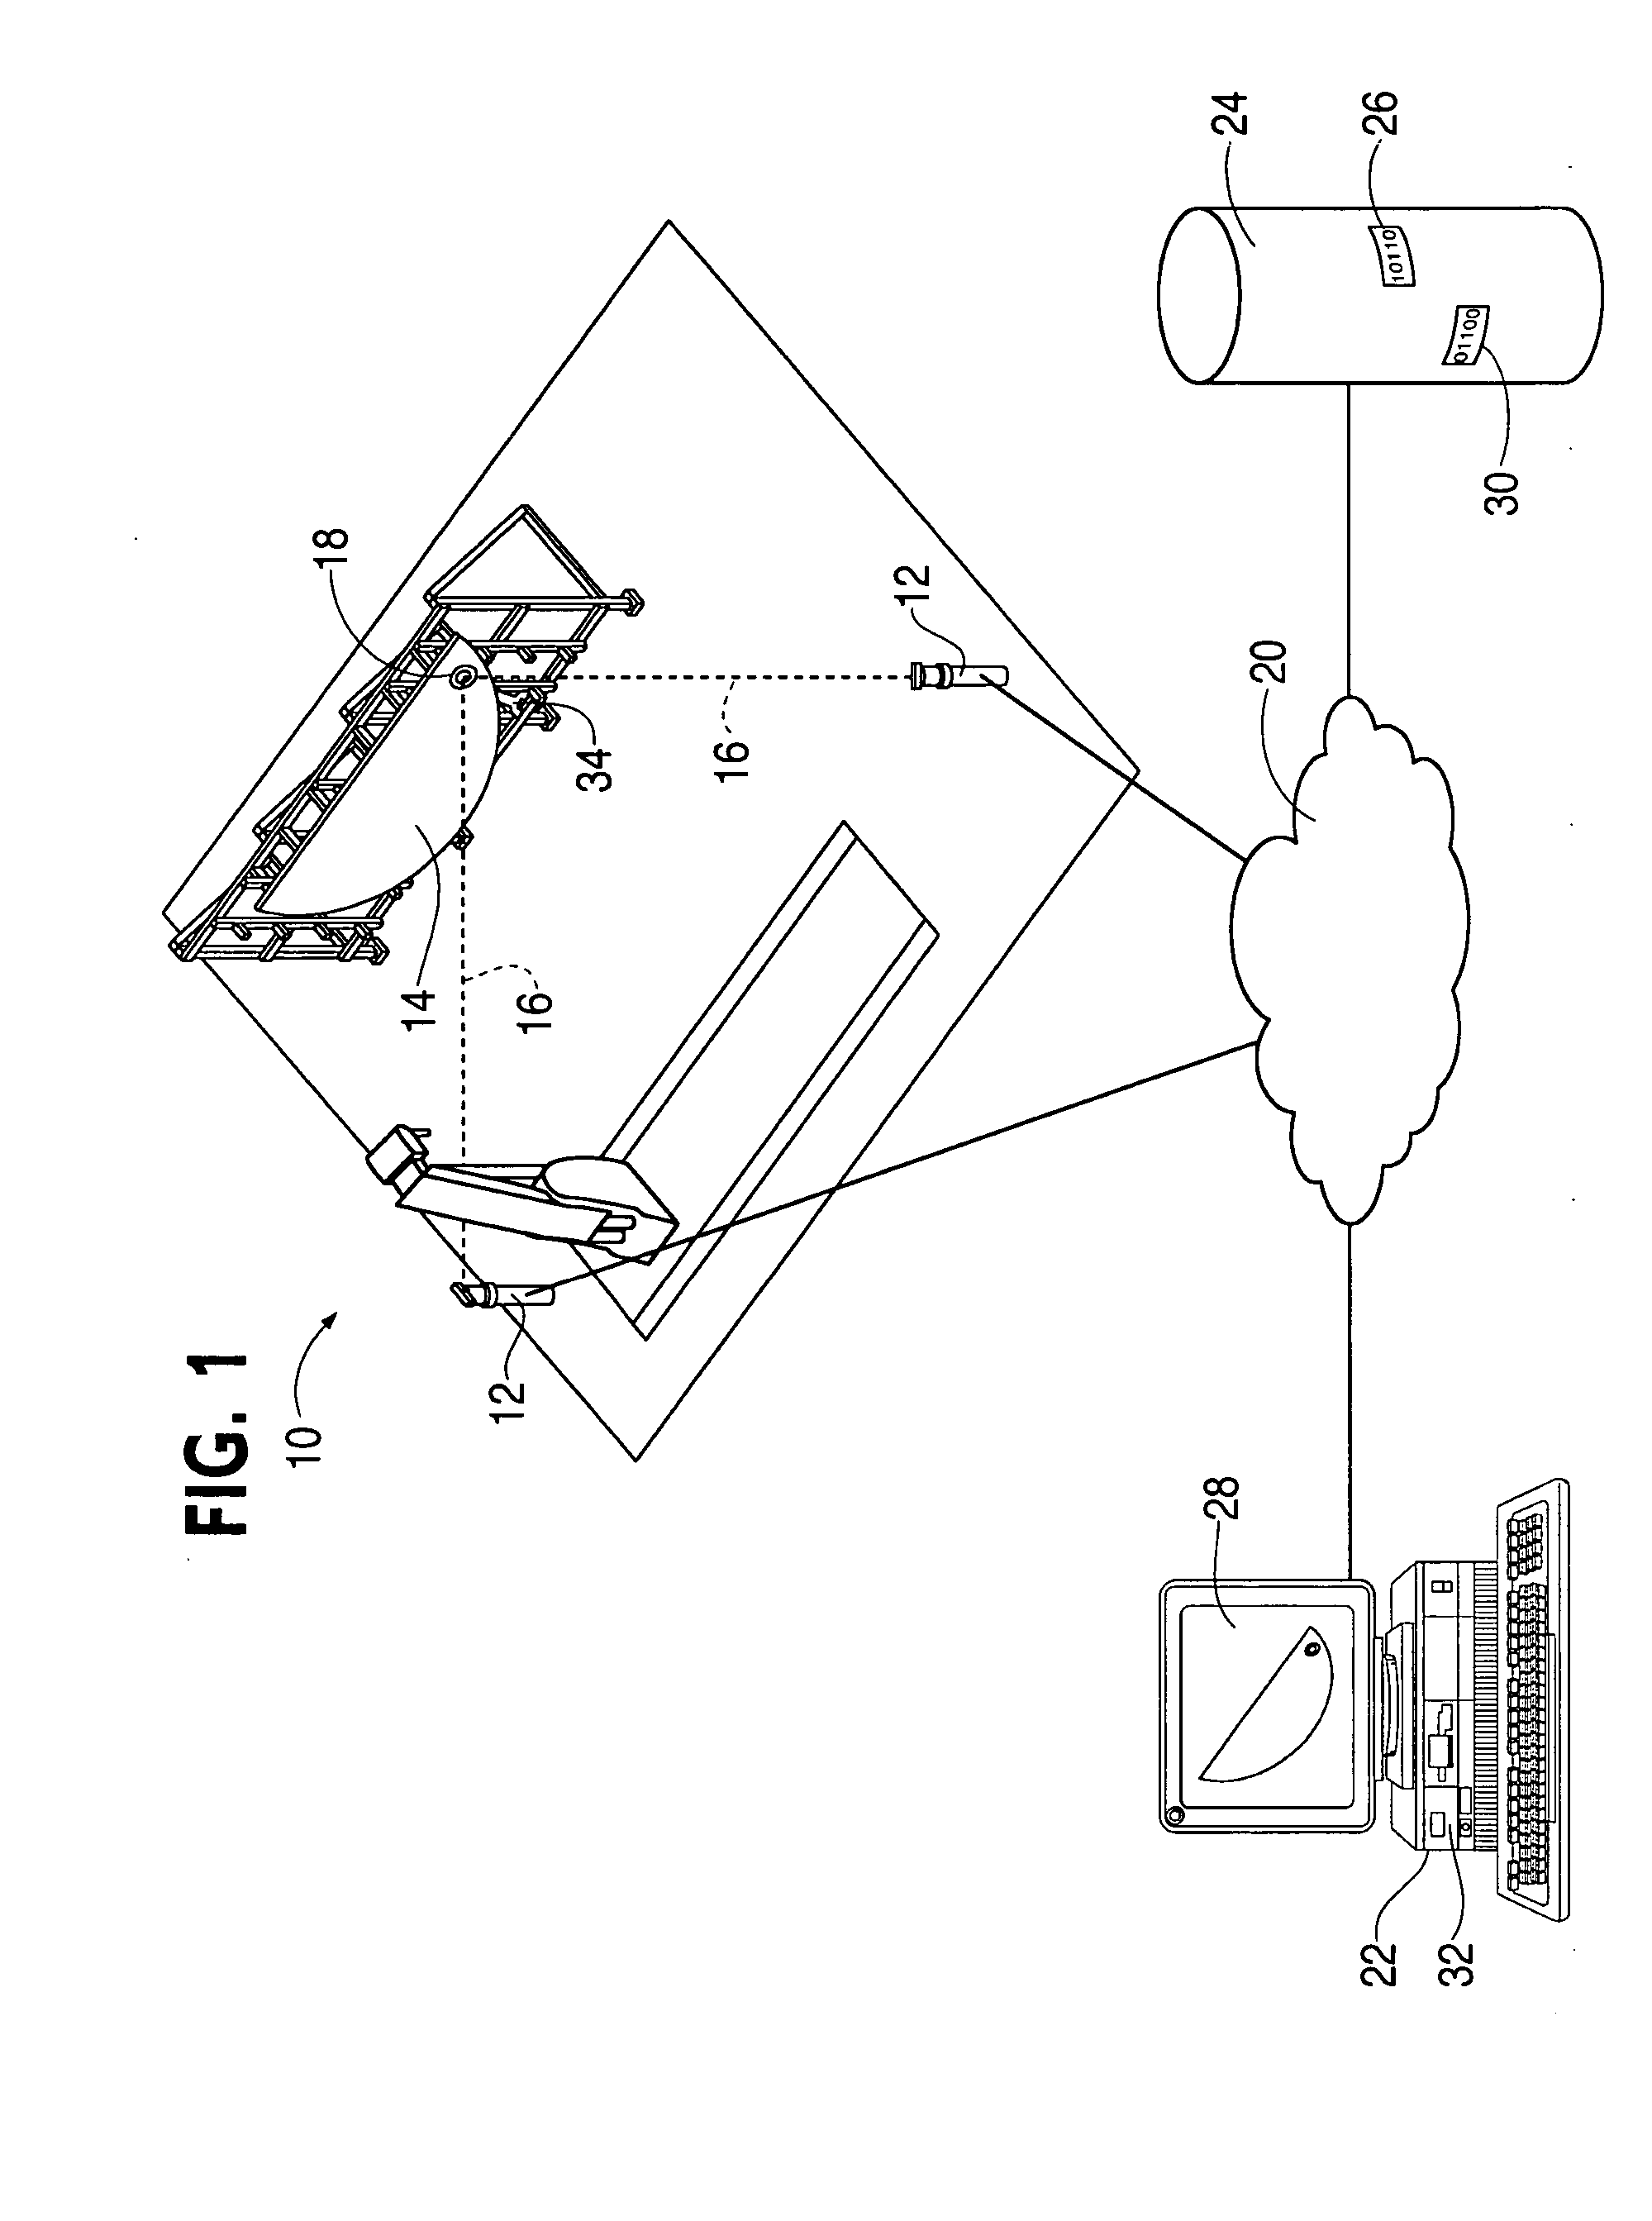 System and method for manufacturing and after-market support using as-built data